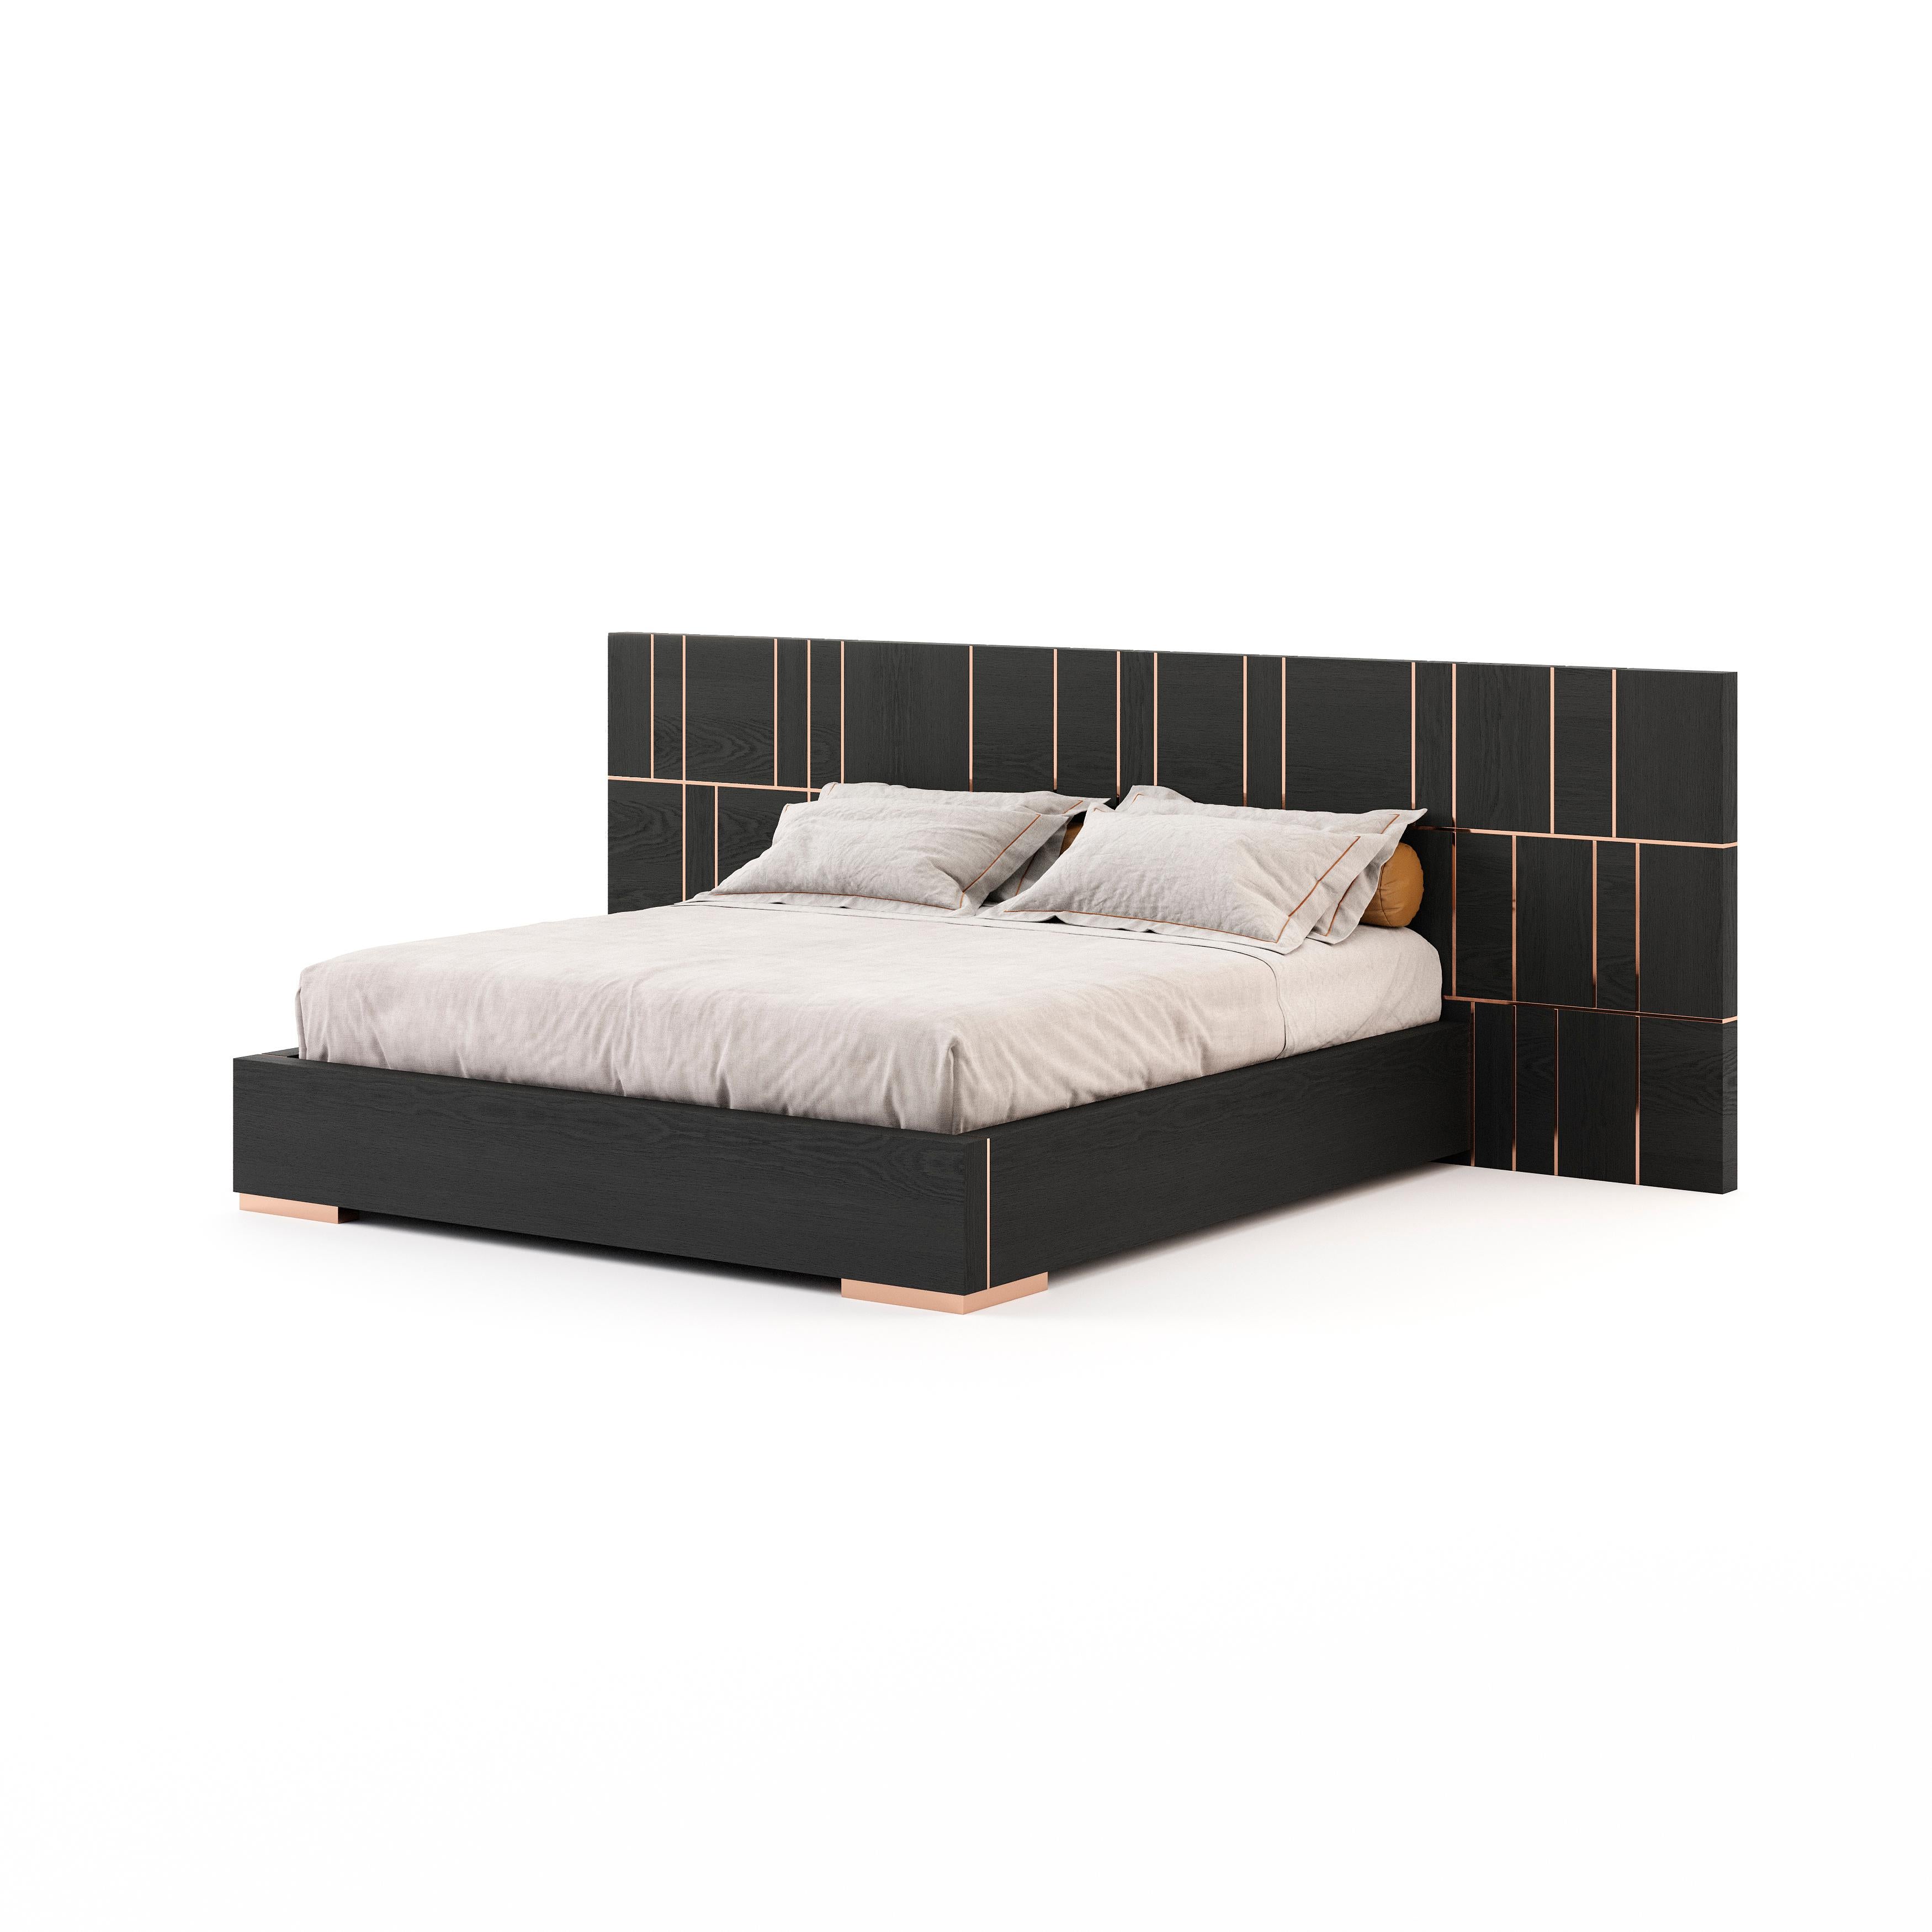 Jackson bed features a modern aesthetic that blends with masculine lines. With its intriguing headboard pattern, this is a bedroom piece that is worth exploring. The elegant bed base adds a touch of sobriety. 

* Available in different finishes.
**